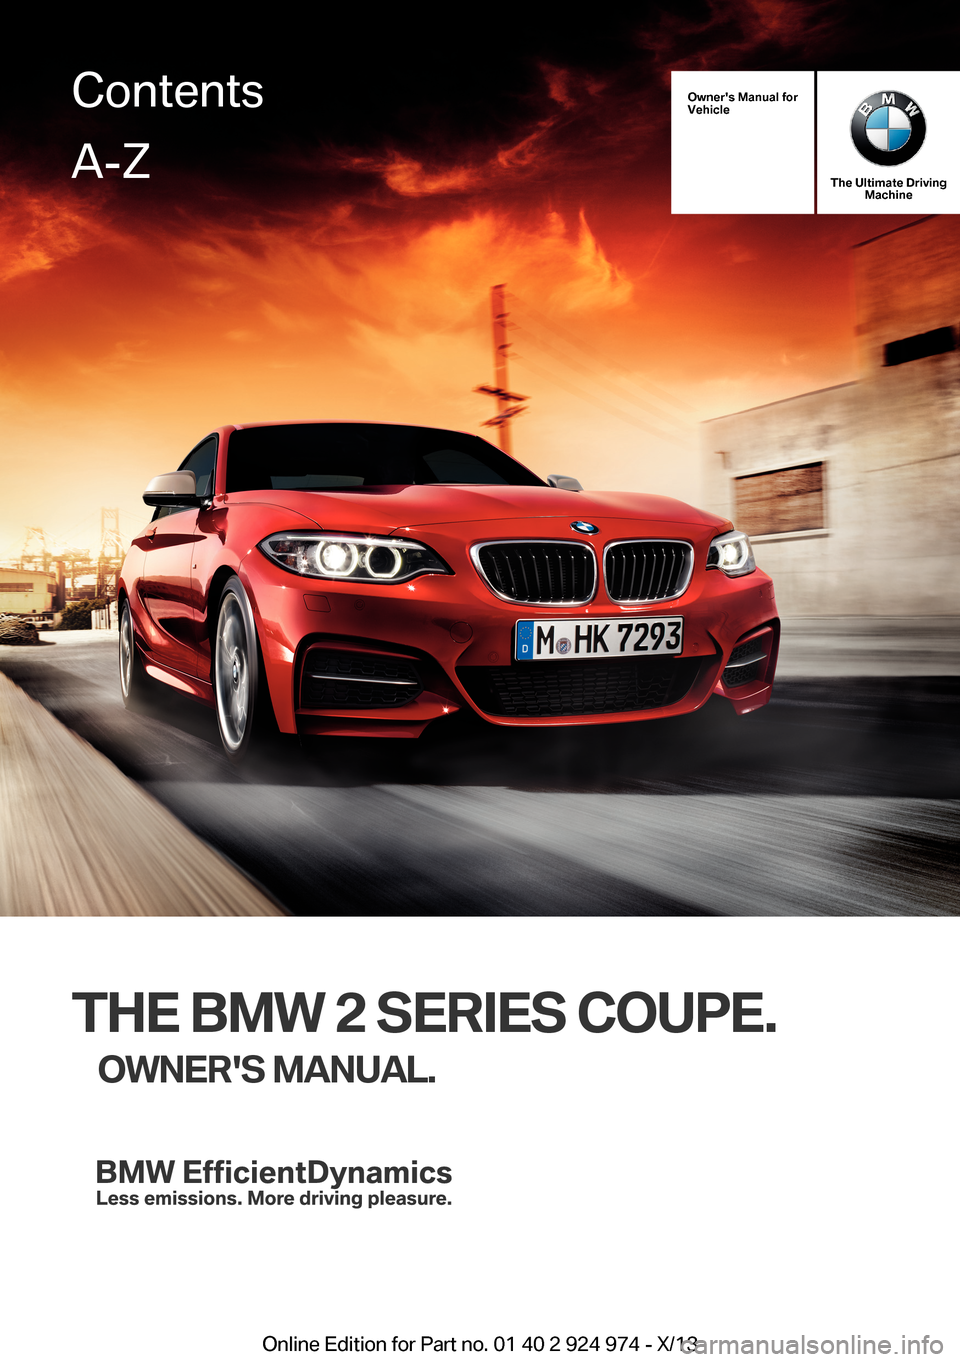 BMW M235I 2014 F22 Owners Manual Owners Manual forVehicle
The Ultimate DrivingMachine
THE BMW 2 SERIES COUPE.
OWNERS MANUAL.ContentsA-Z
Online Edition for Part no. 01 40 2 924 974 - X/13   